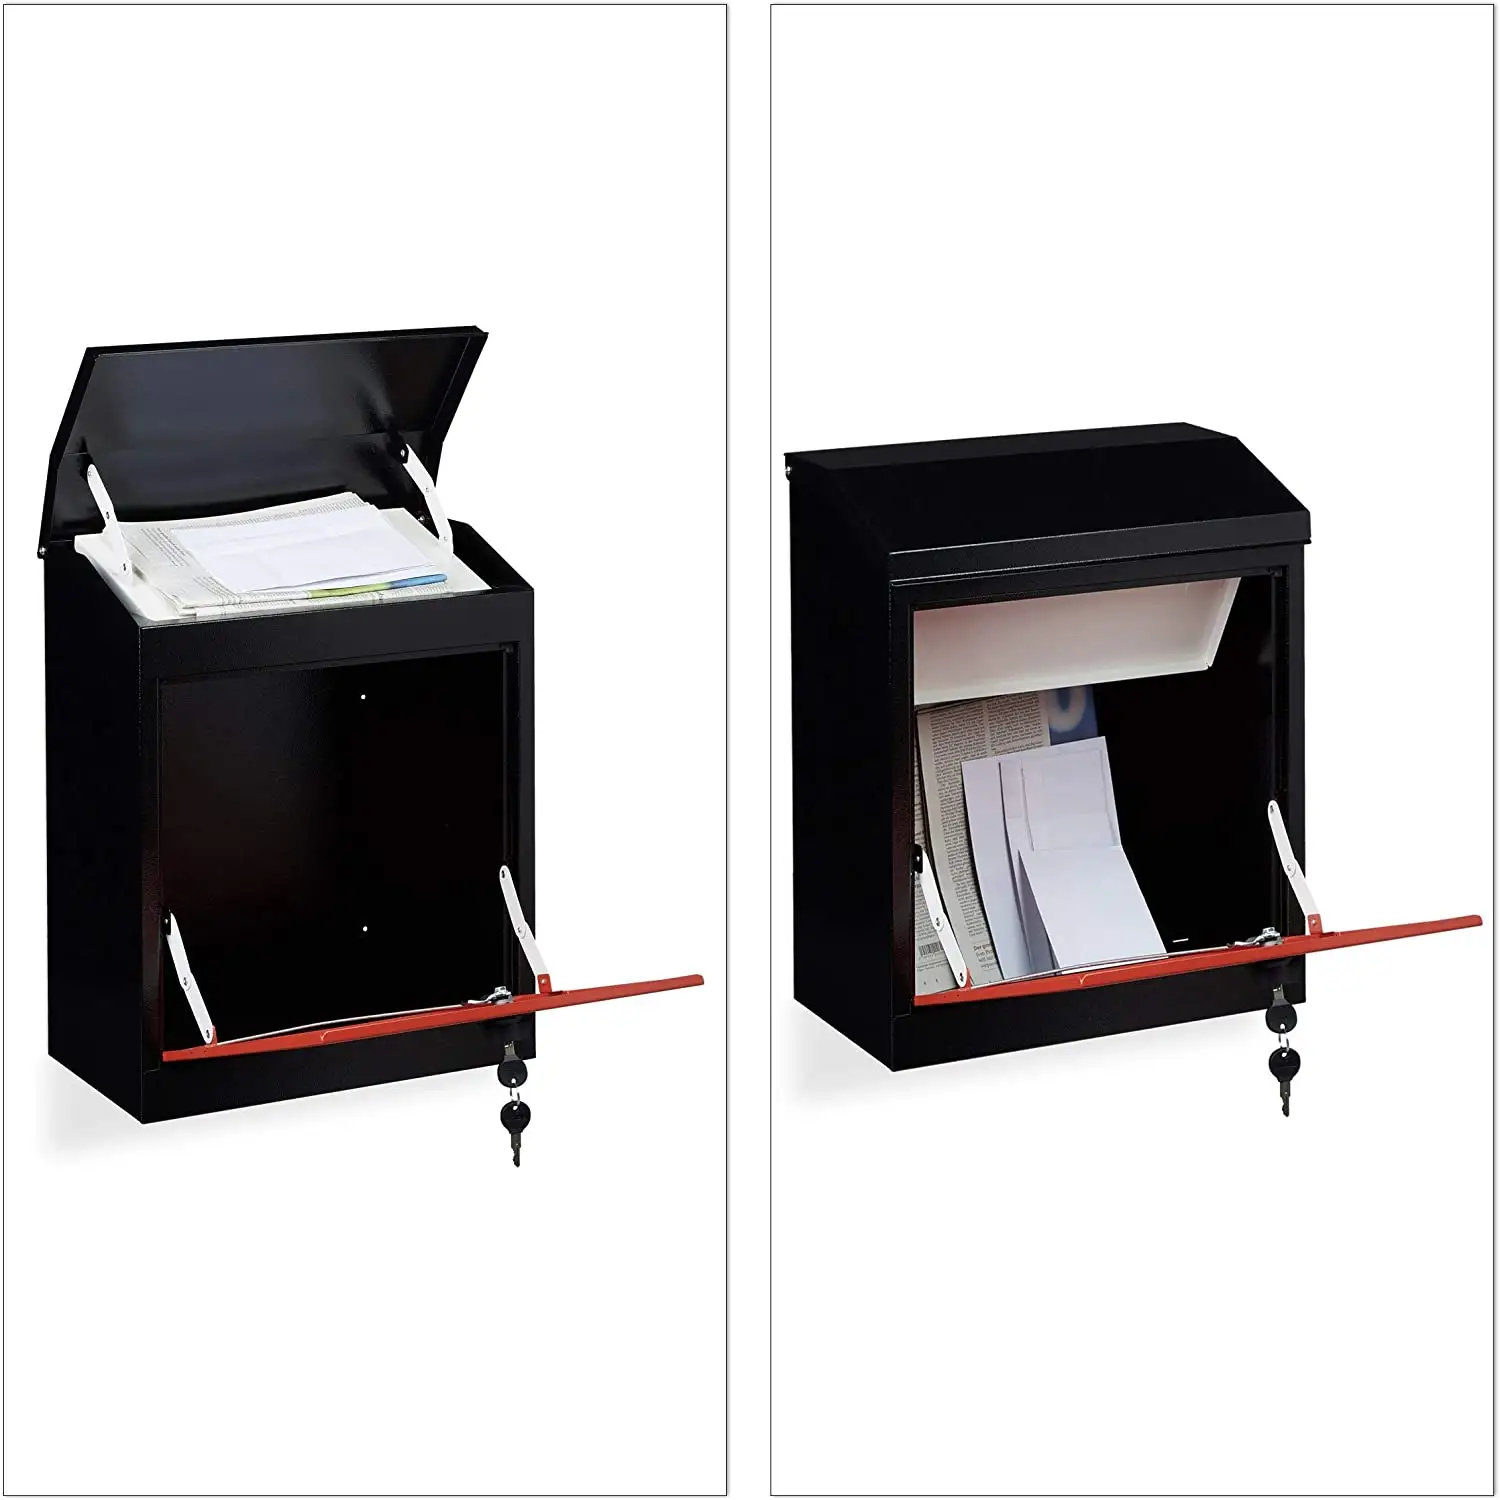 Parcel Drop Box For Mail And Parcel Custom Small Metal Outdoor Parcel Delivery Box Large Small Parcel Boxes Letter Post Parcel Drop Box For Mail